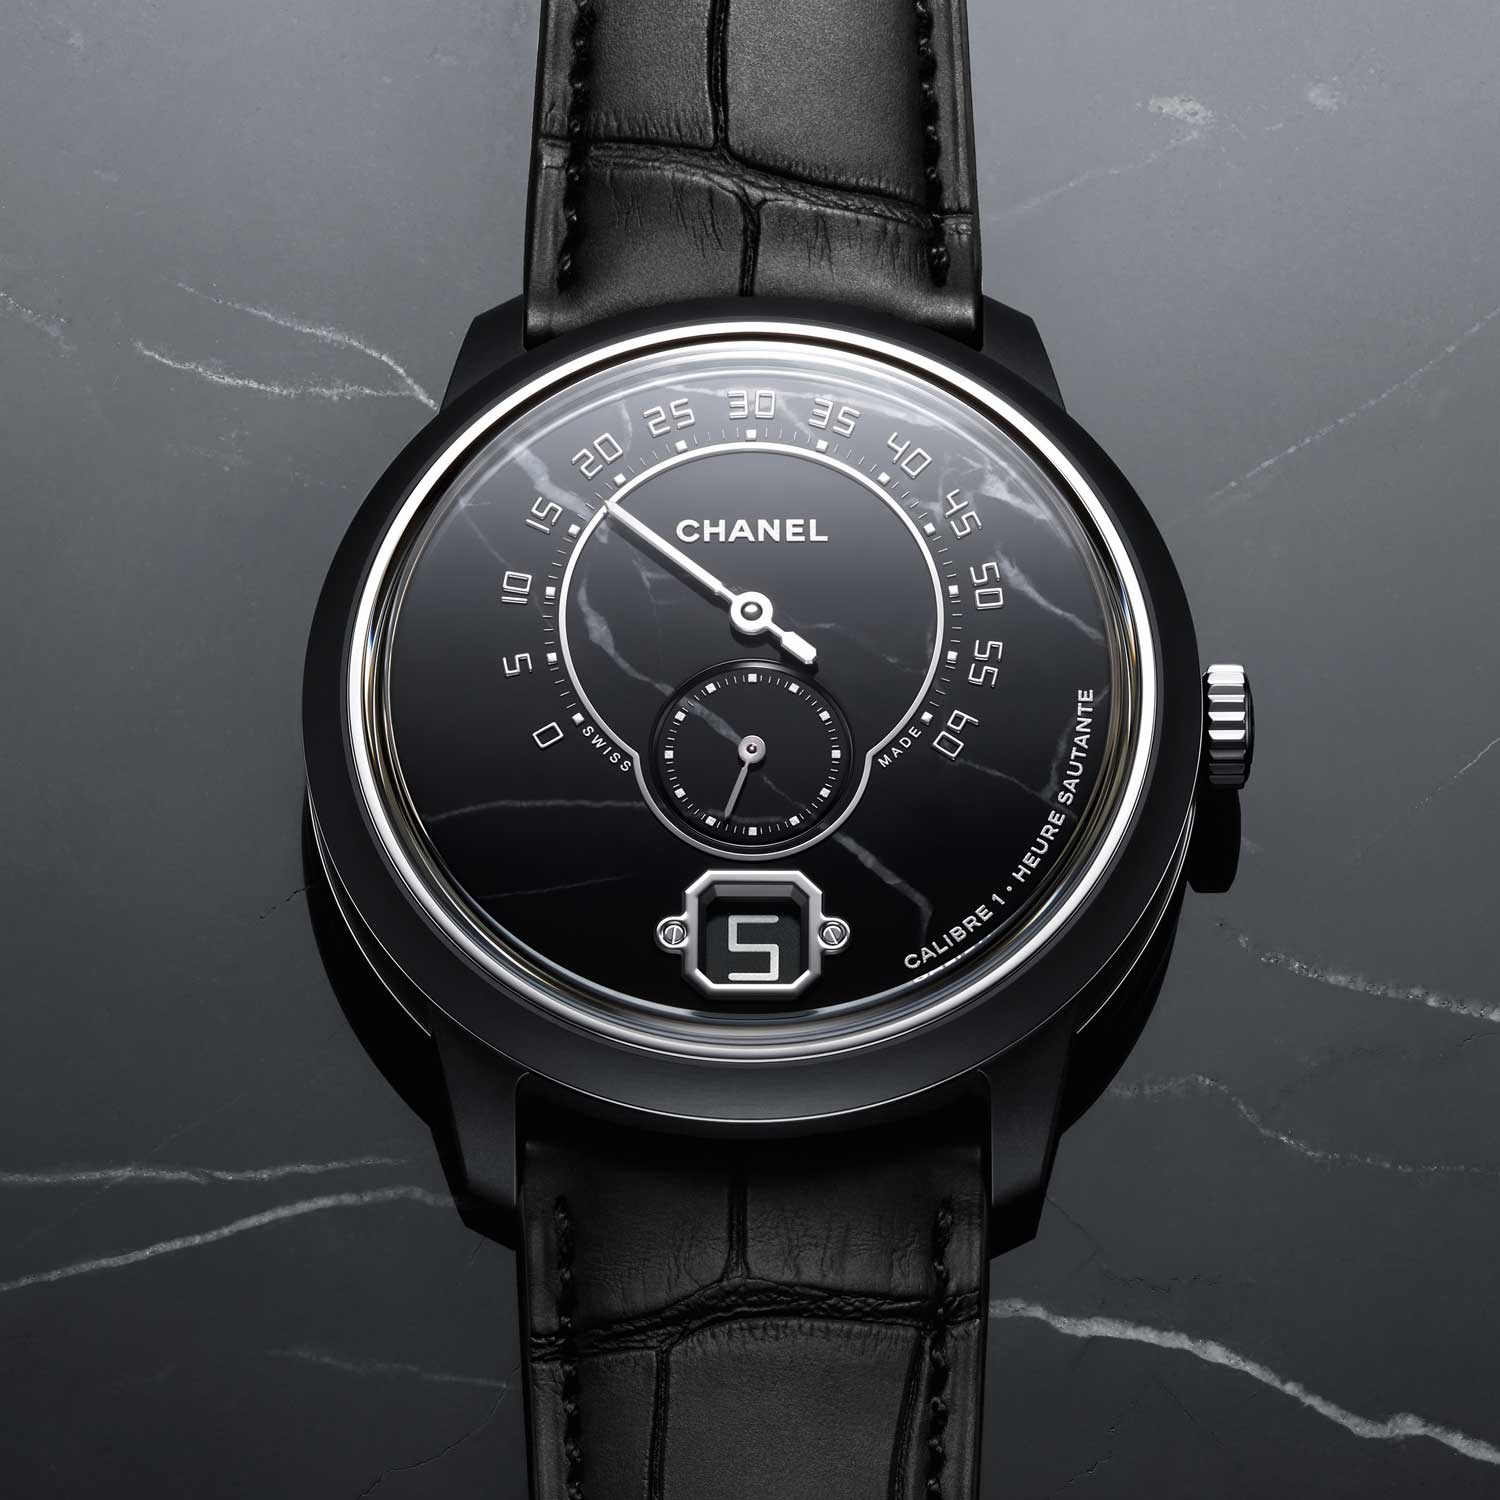 The Monsieur Marble Edition with a dial crafted from white-veined black marble